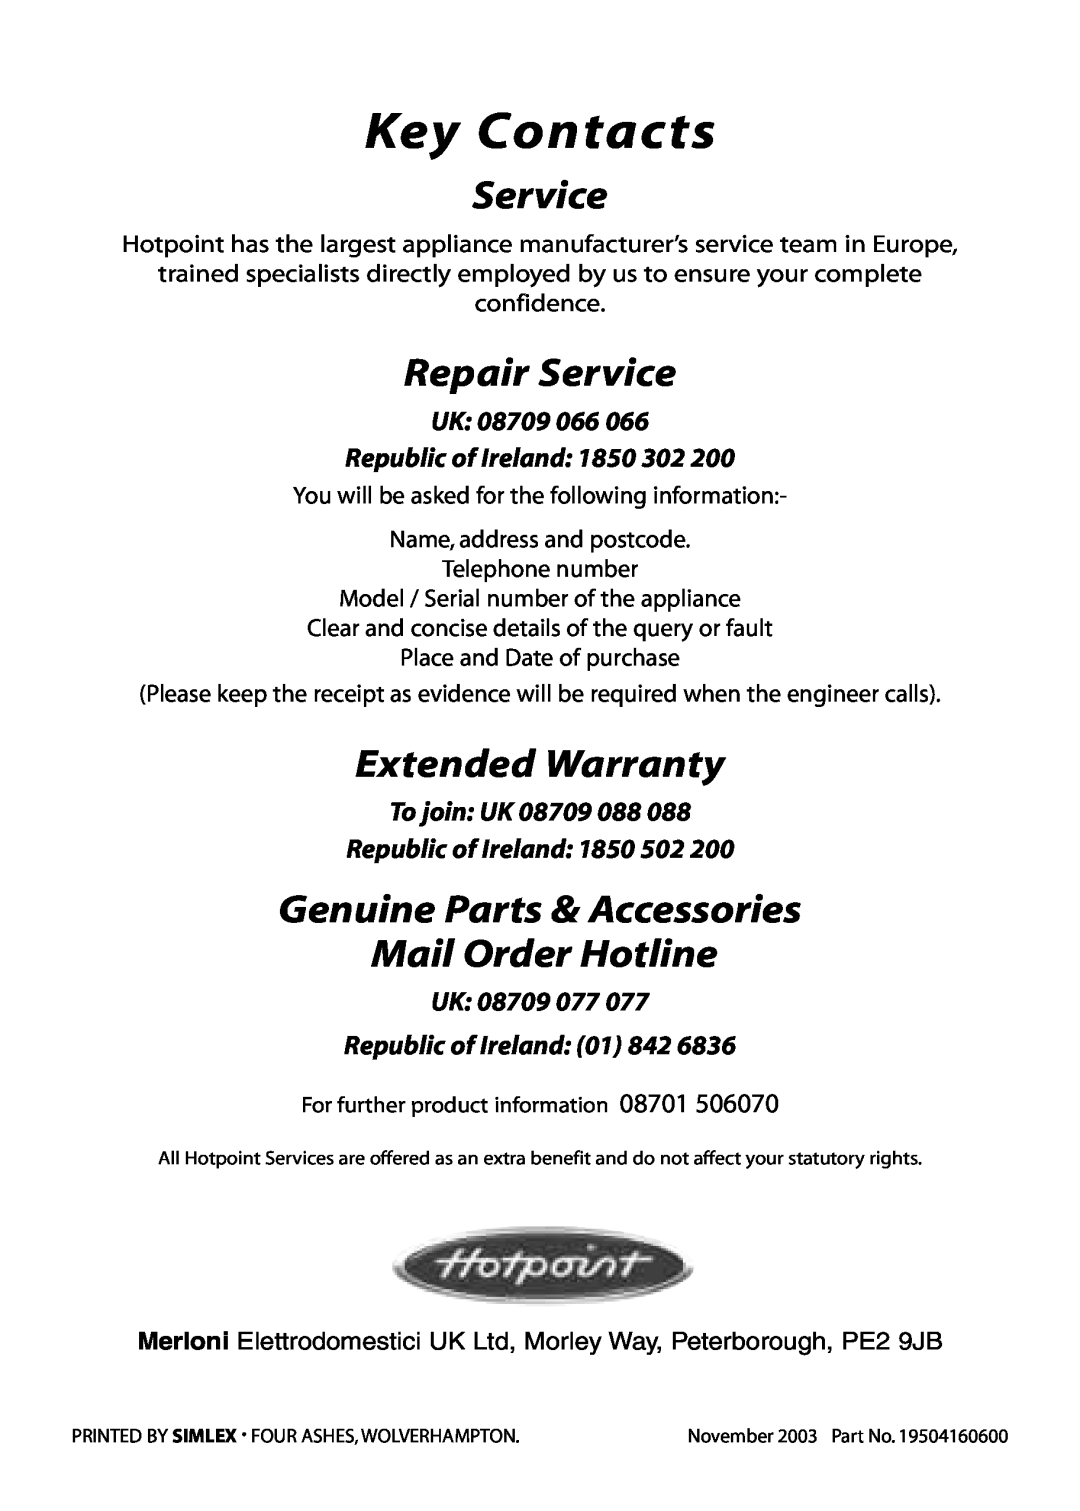 Hotpoint EG53, EG72 Key Contacts, Repair Service, Extended Warranty, Genuine Parts & Accessories Mail Order Hotline 